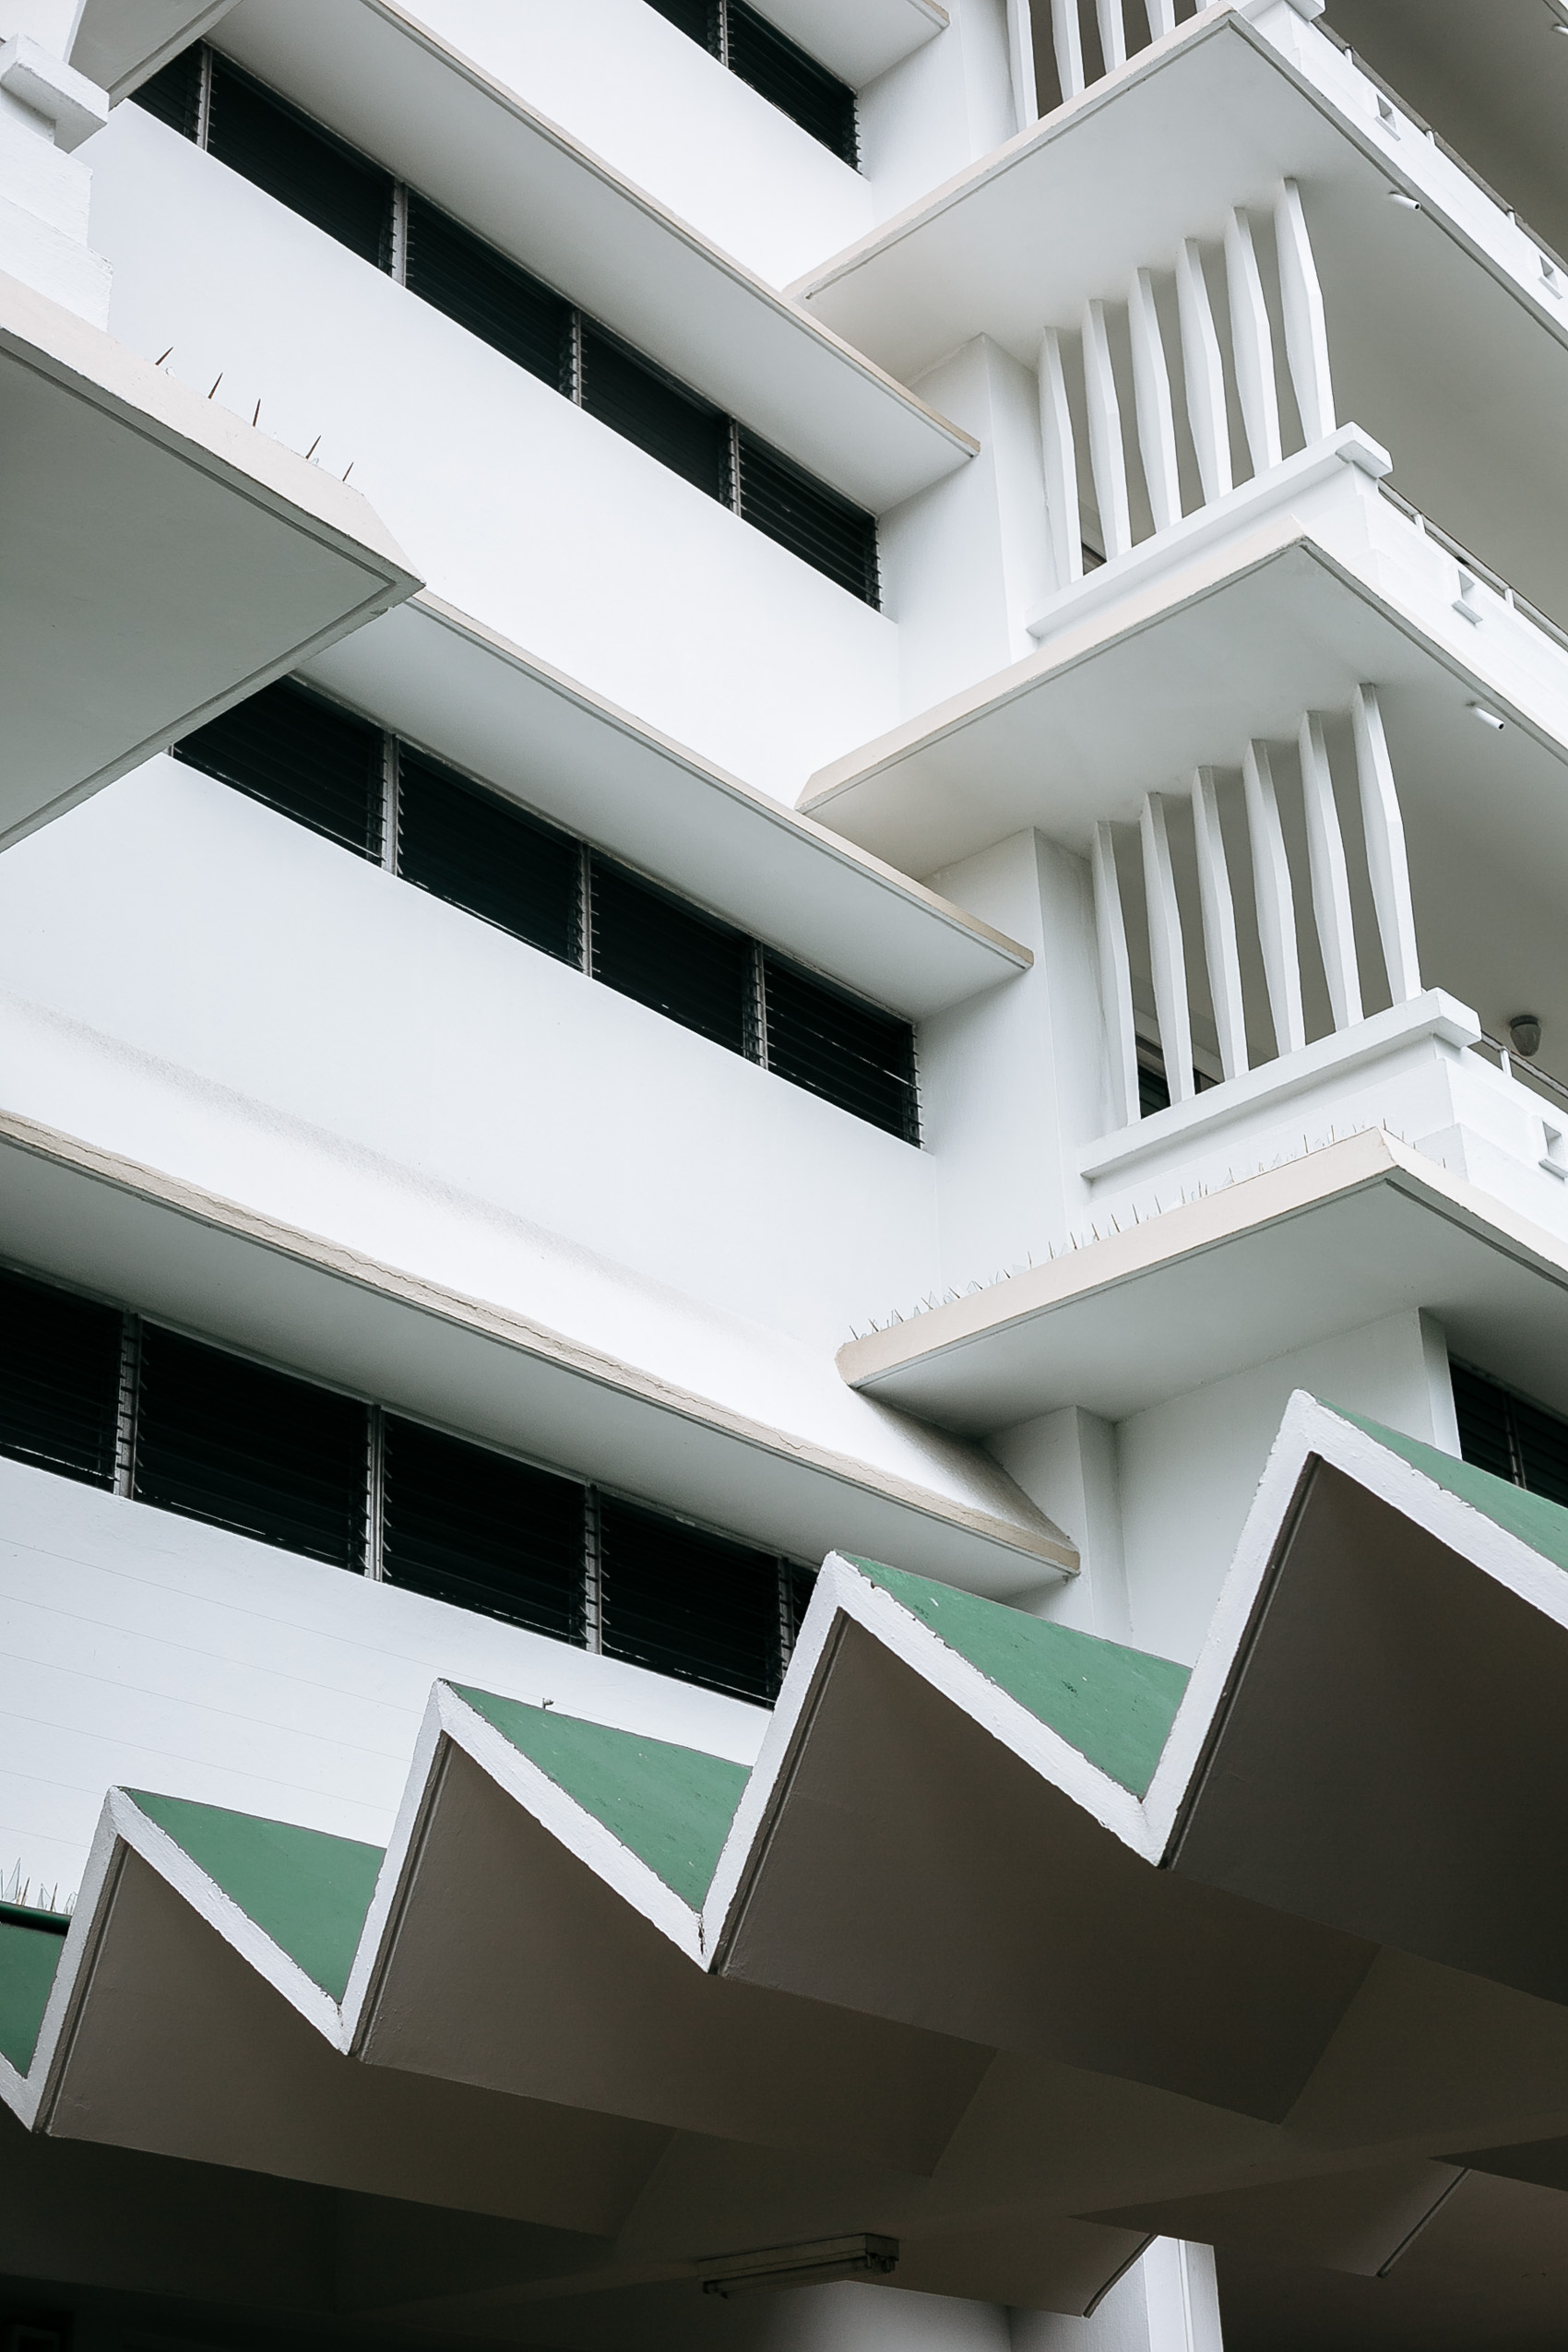 Midcentury modernist architecture from Panama